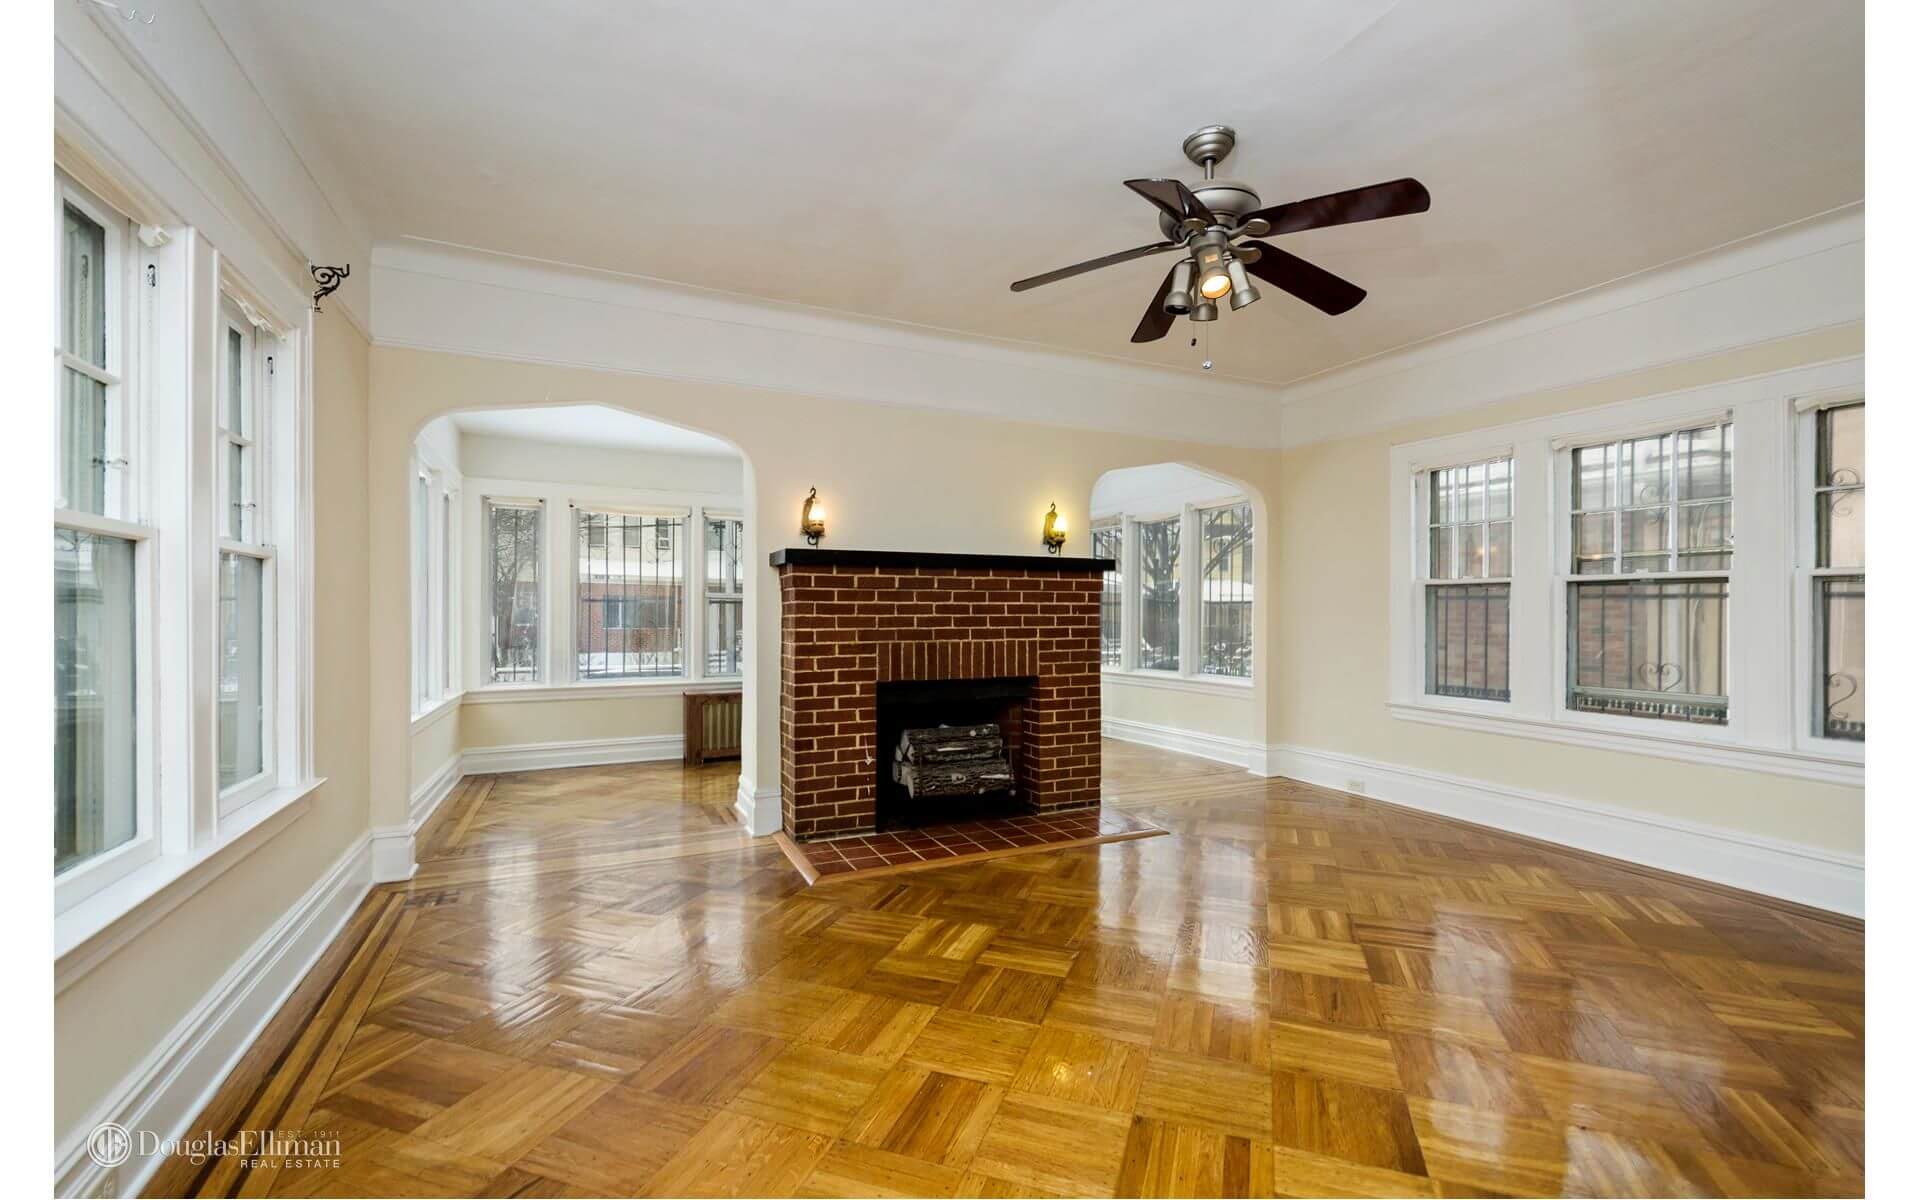 Brooklyn Homes for Sale in Flatbush at 787 East 34th Street